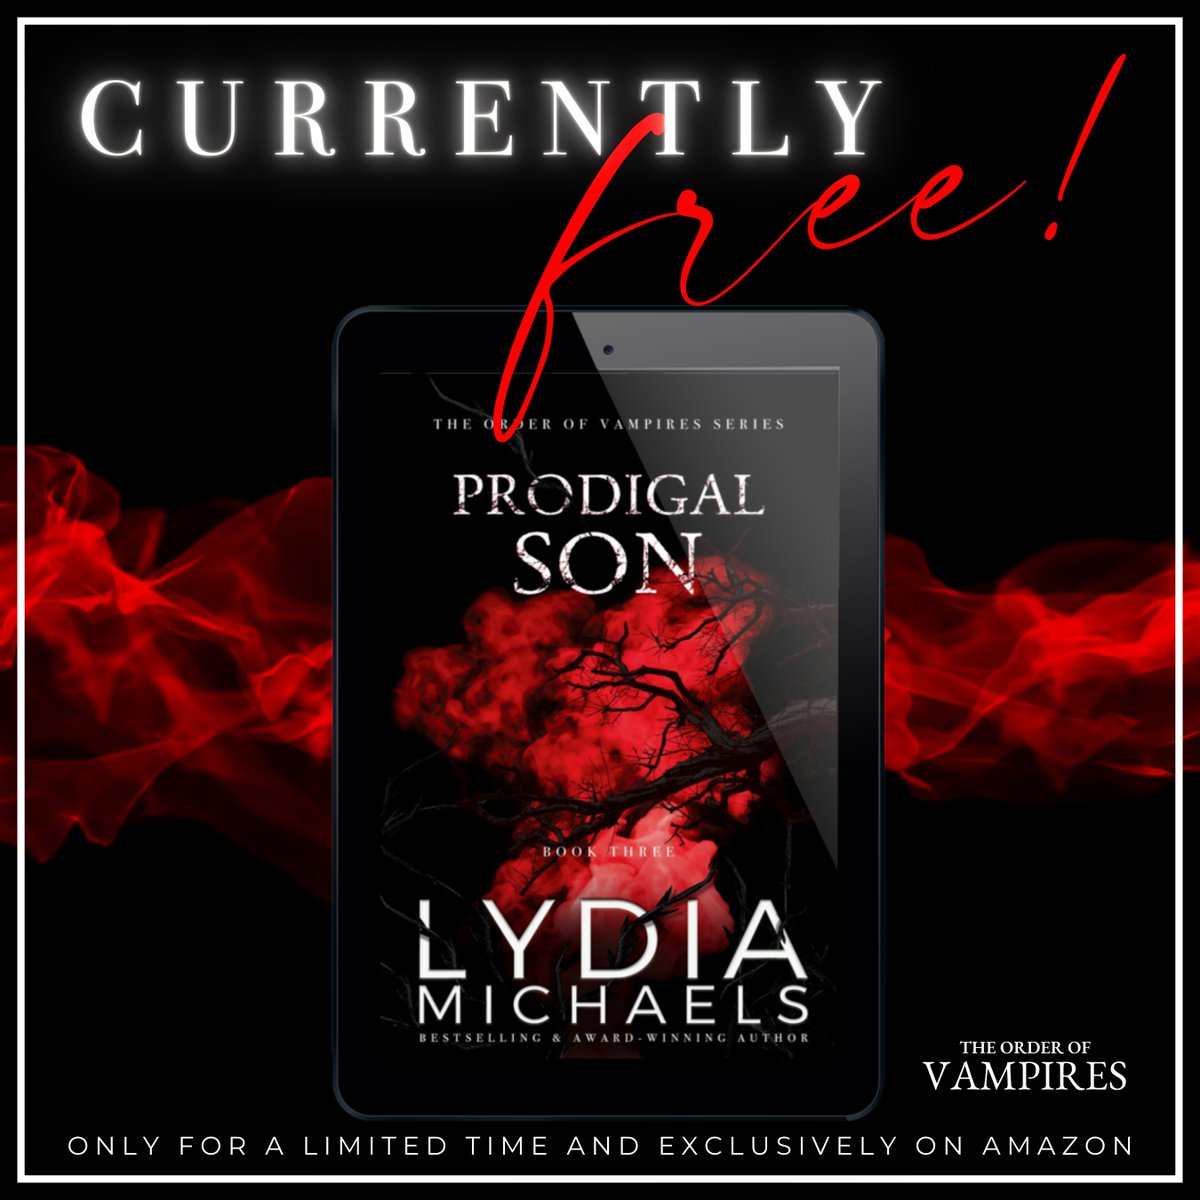 ✨Currently FREE!✨

Prodigal Son is book #3 in The Order of Vampires series: amzn.to/3tVgwc7
Ends tomorrow!

@Lydia_Michaels #LydiaMichaels #TheOrderofVampires #vampire #vampirebooks #vampireseries #darkromance #paranormalromance #darkparanormal #pnr